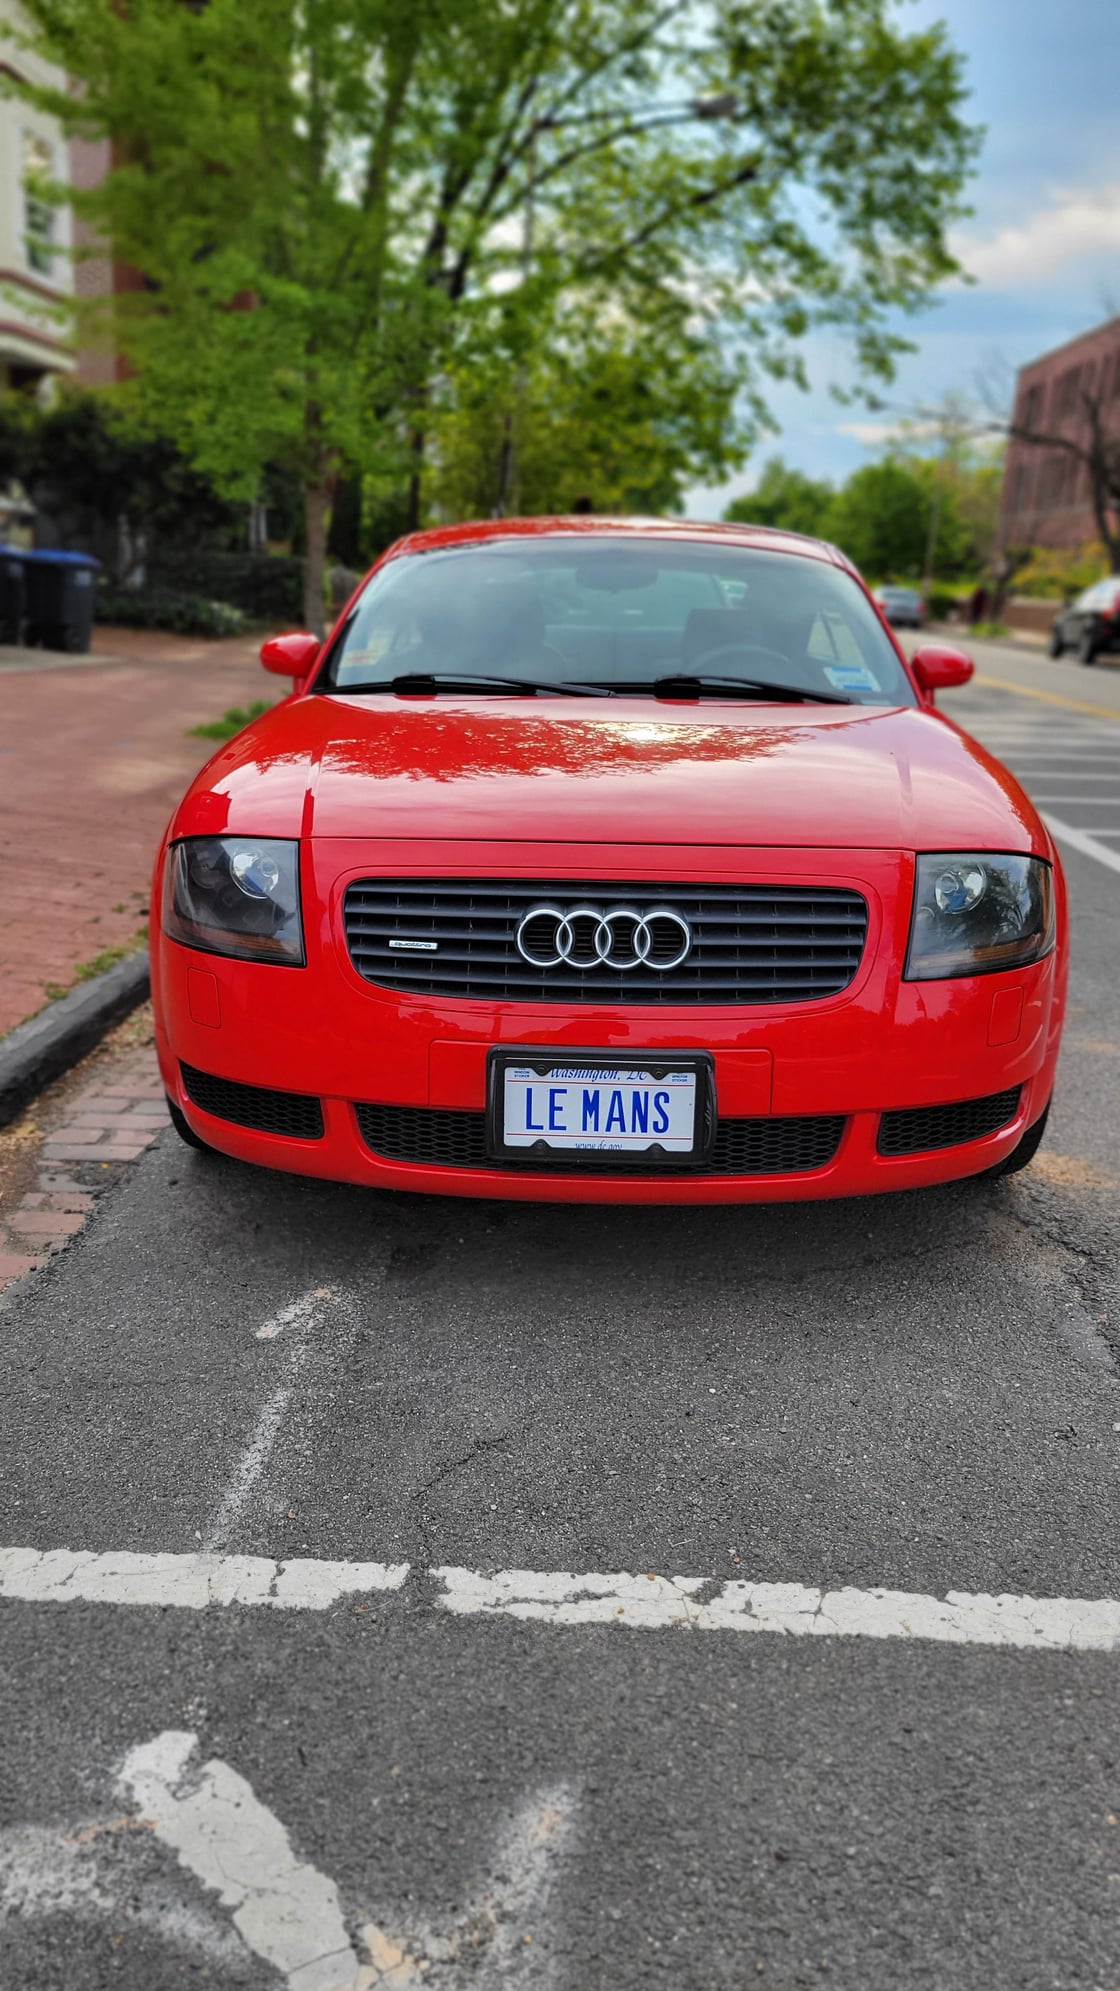 2002 Audi TT Quattro - 2002 Audi Misano Red TT ALMS Edition - Used - VIN TRUWT28N921024734 - 127,500 Miles - 4 cyl - AWD - Manual - Coupe - Red - Washington, DC 20003, United States